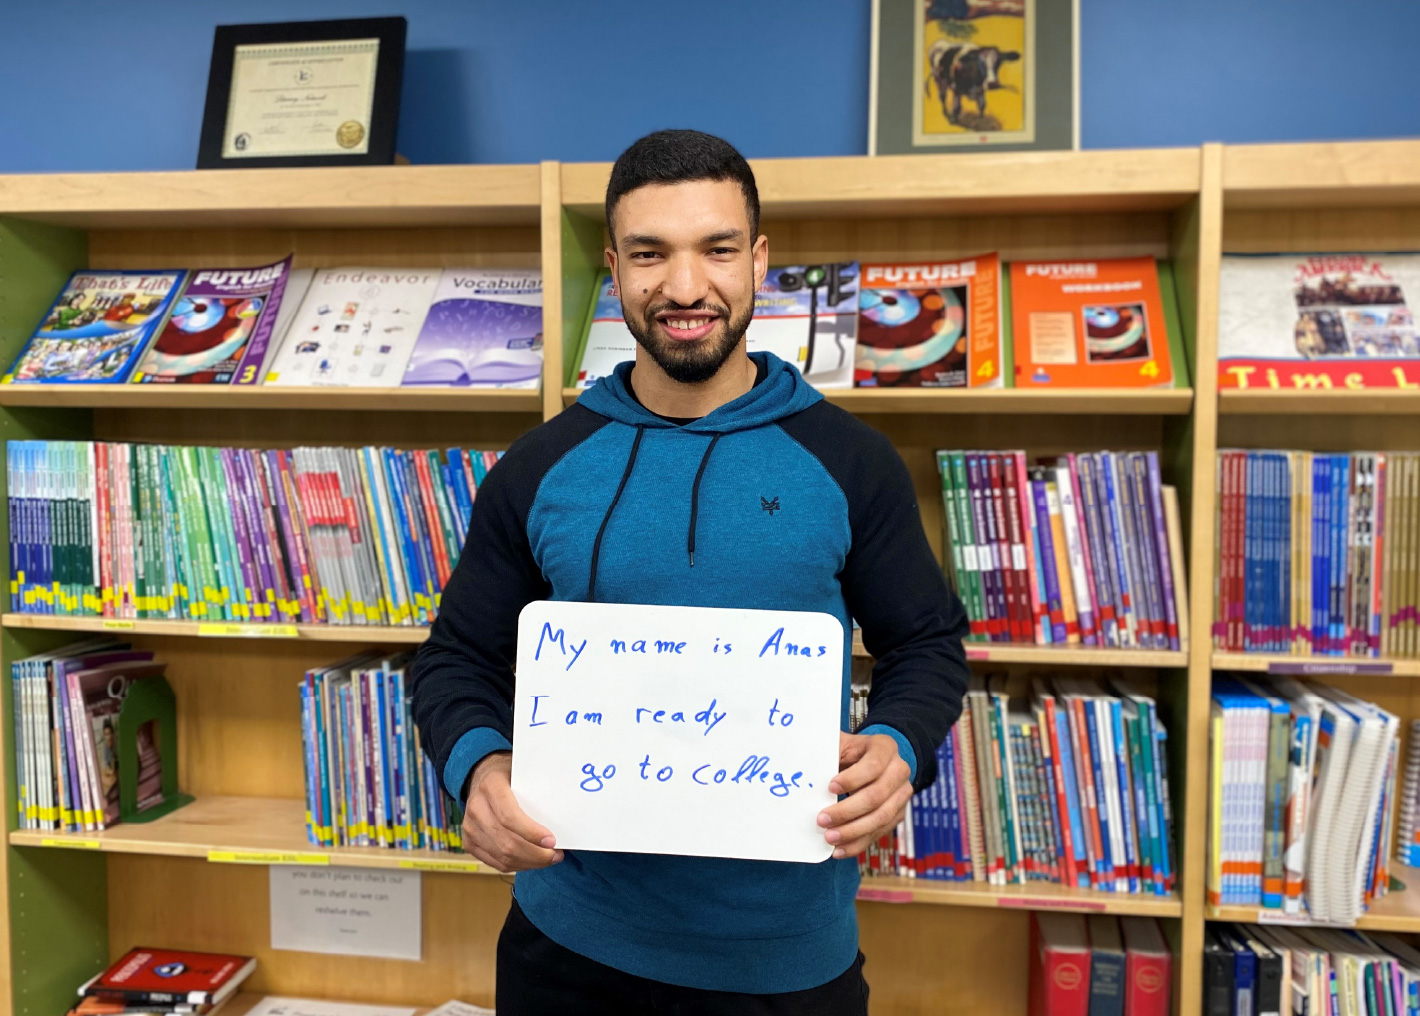 Man in a library holding a sign that says "My name is Ana and I am ready to go to college."